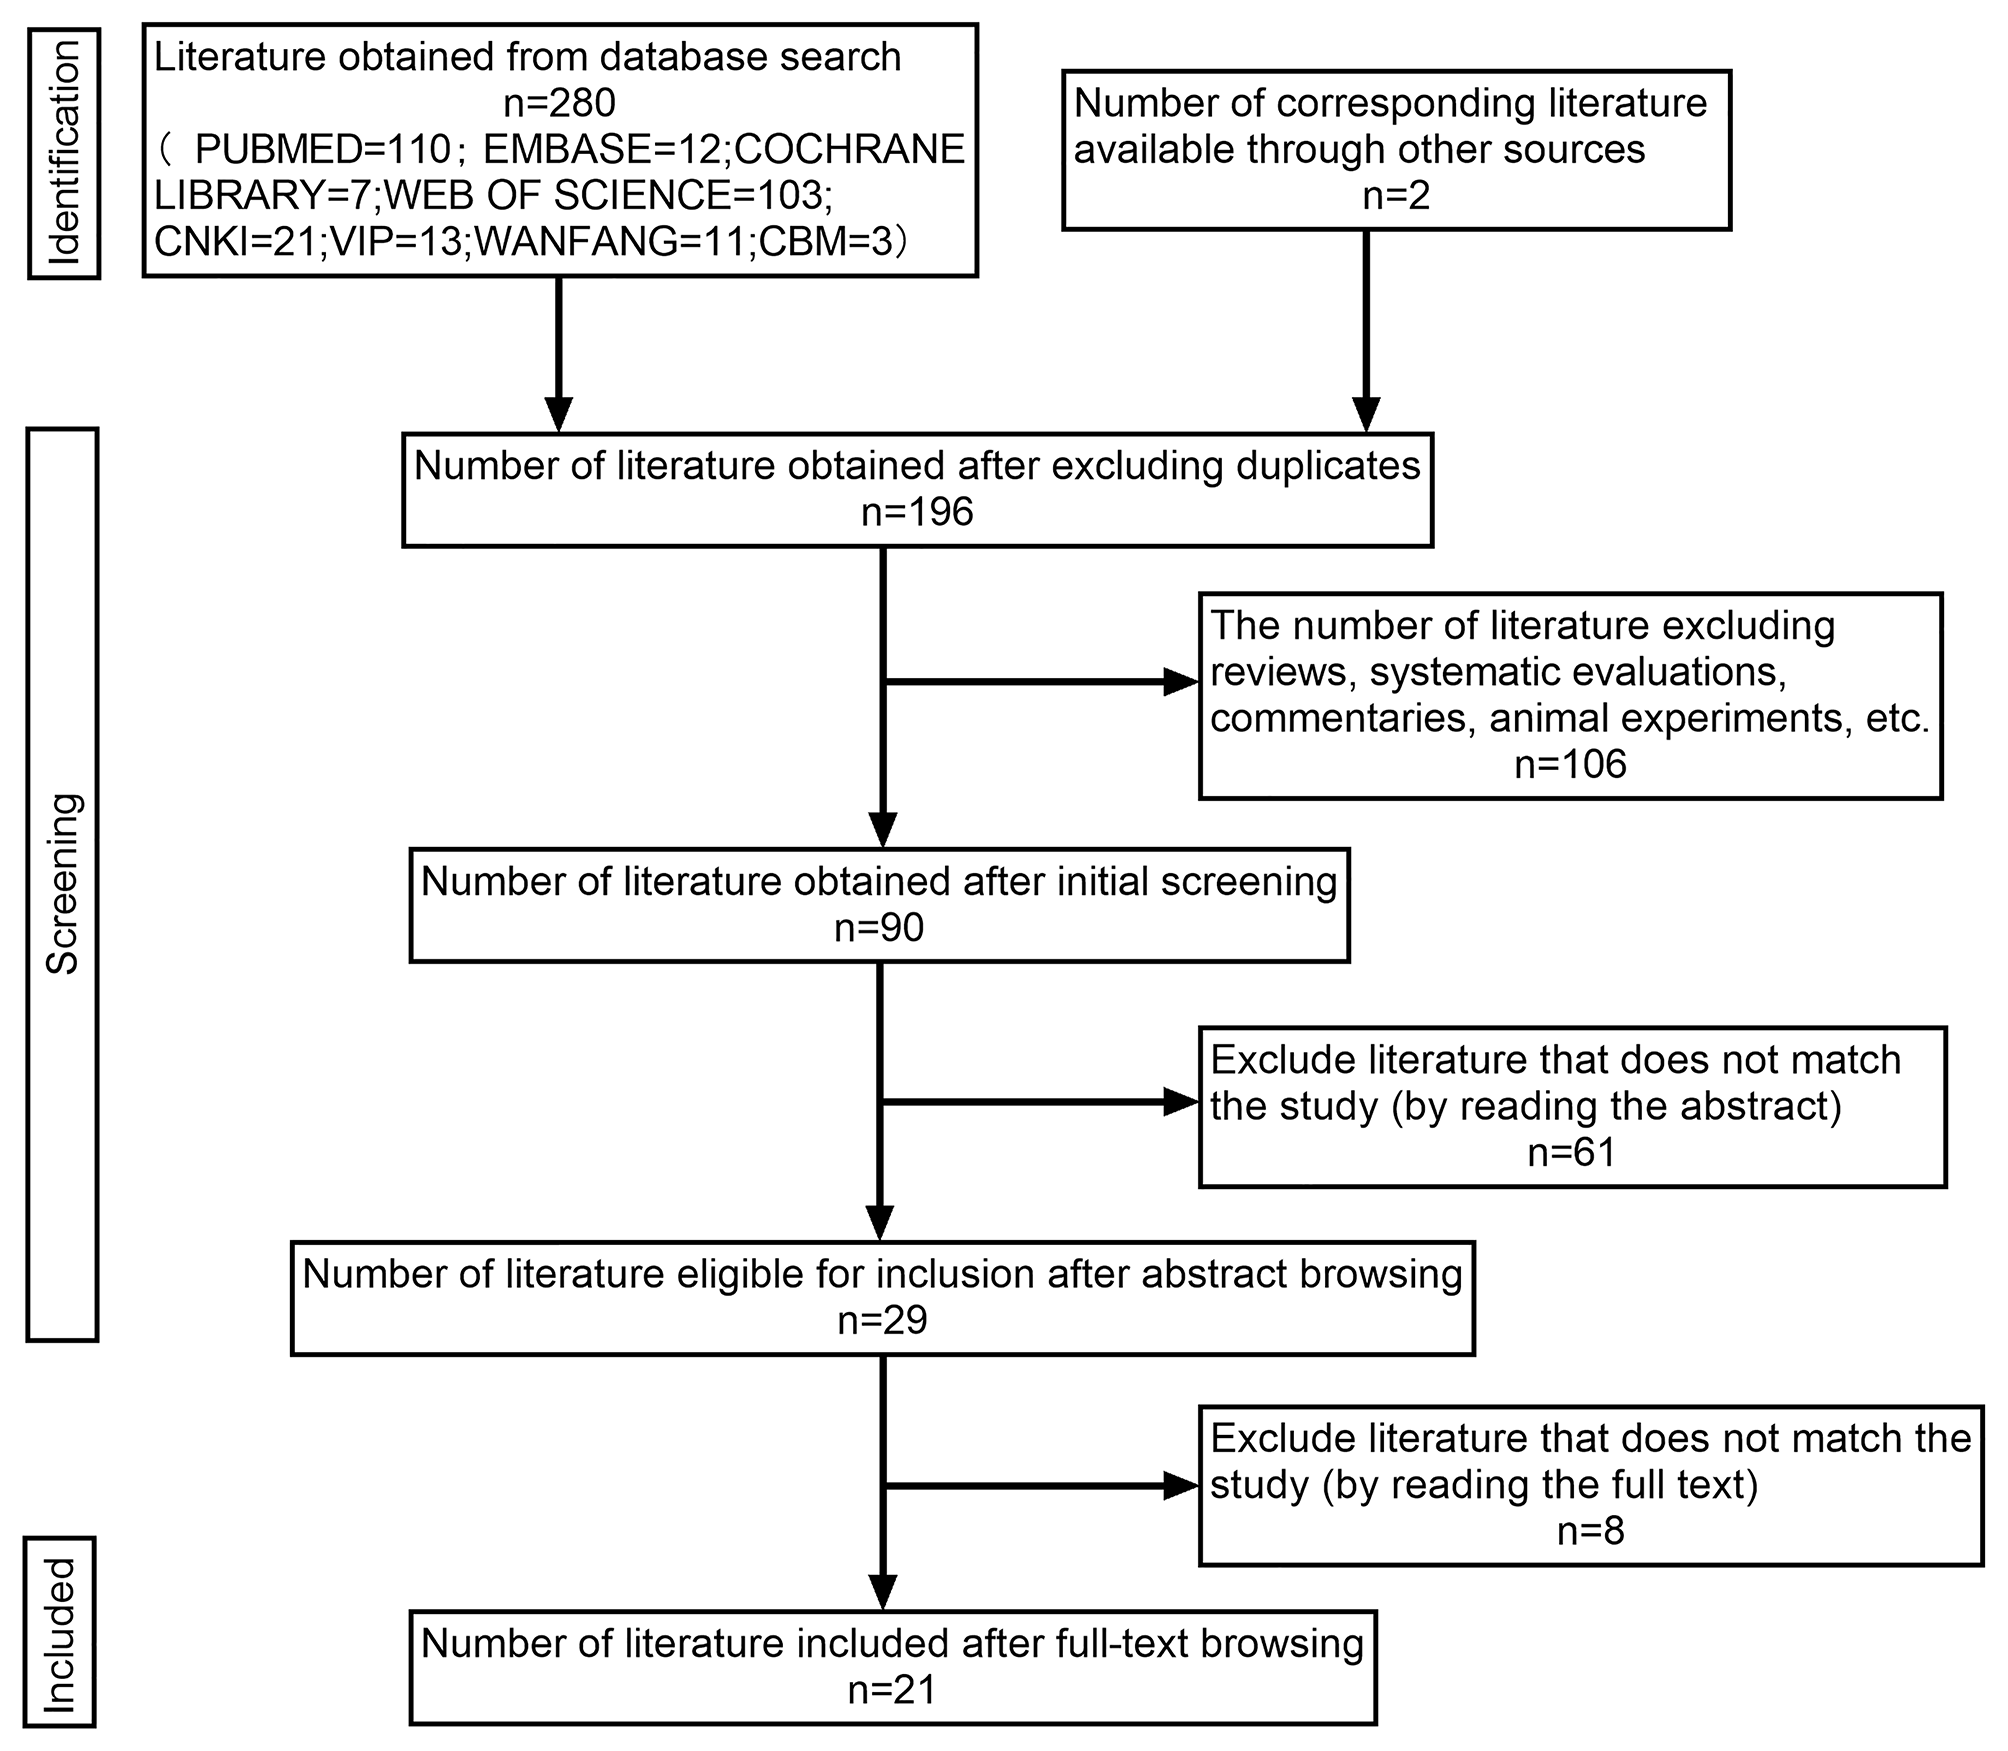 The association of FKBP5 gene polymorphism with genetic susceptibility to depression and response to antidepressant treatment- a systematic review